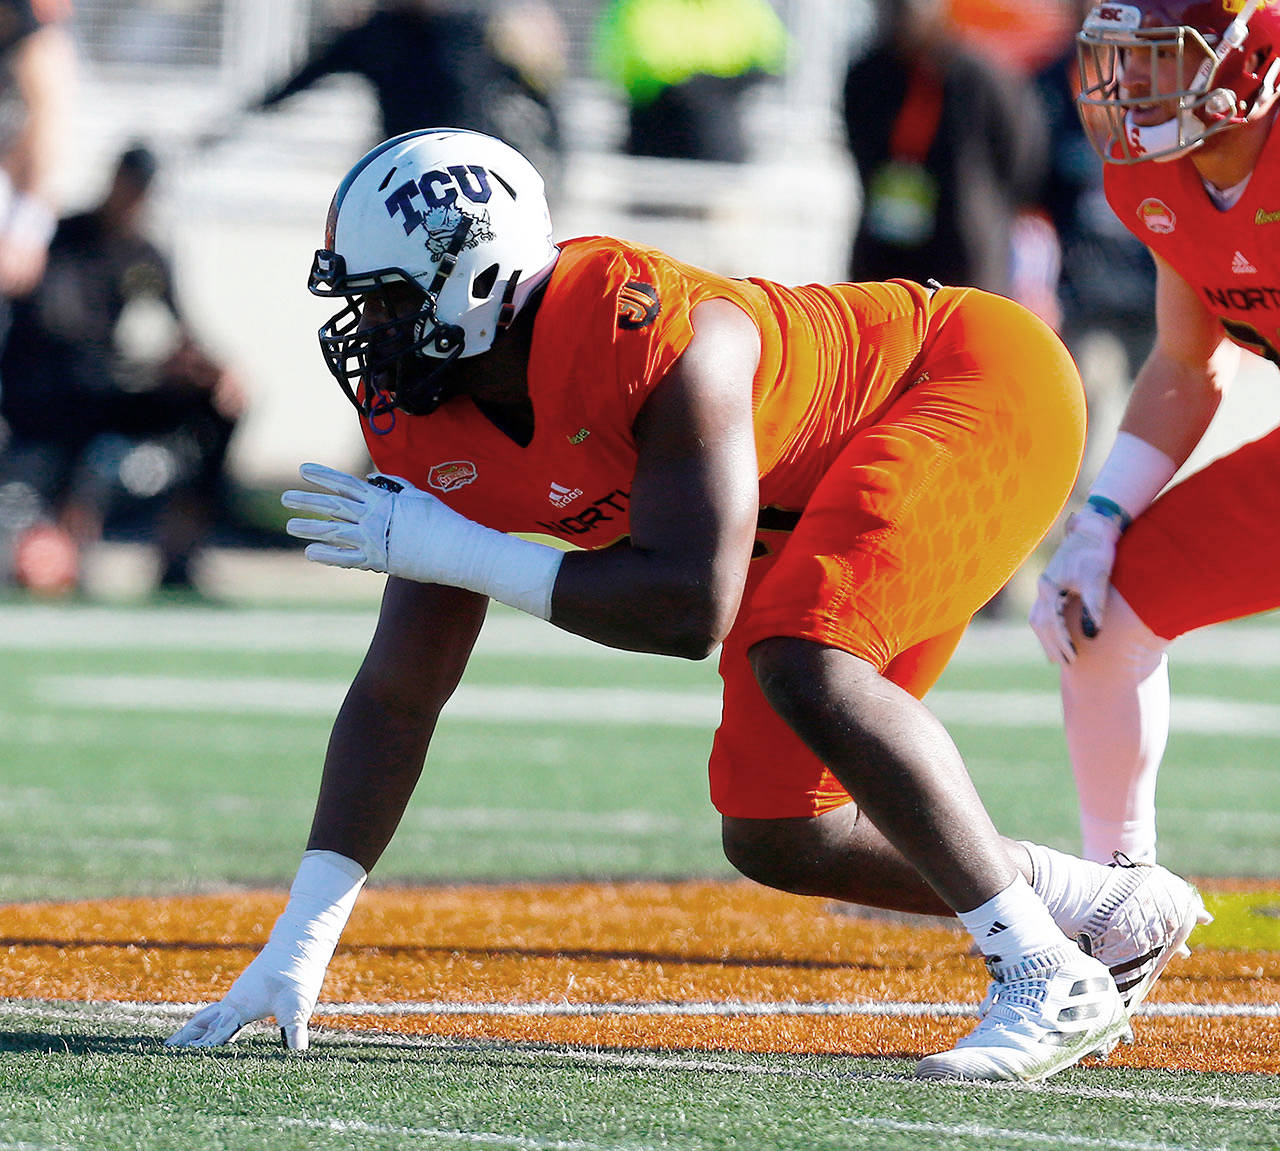 TCU’s L.J. Collier lines up during the Senior Bowl on Jan. 26 in Mobile, Alabama. The Seahawks selected Collier with the 29th pick in the first round of the NFL draft Thursday. (AP Photo/Butch Dill)